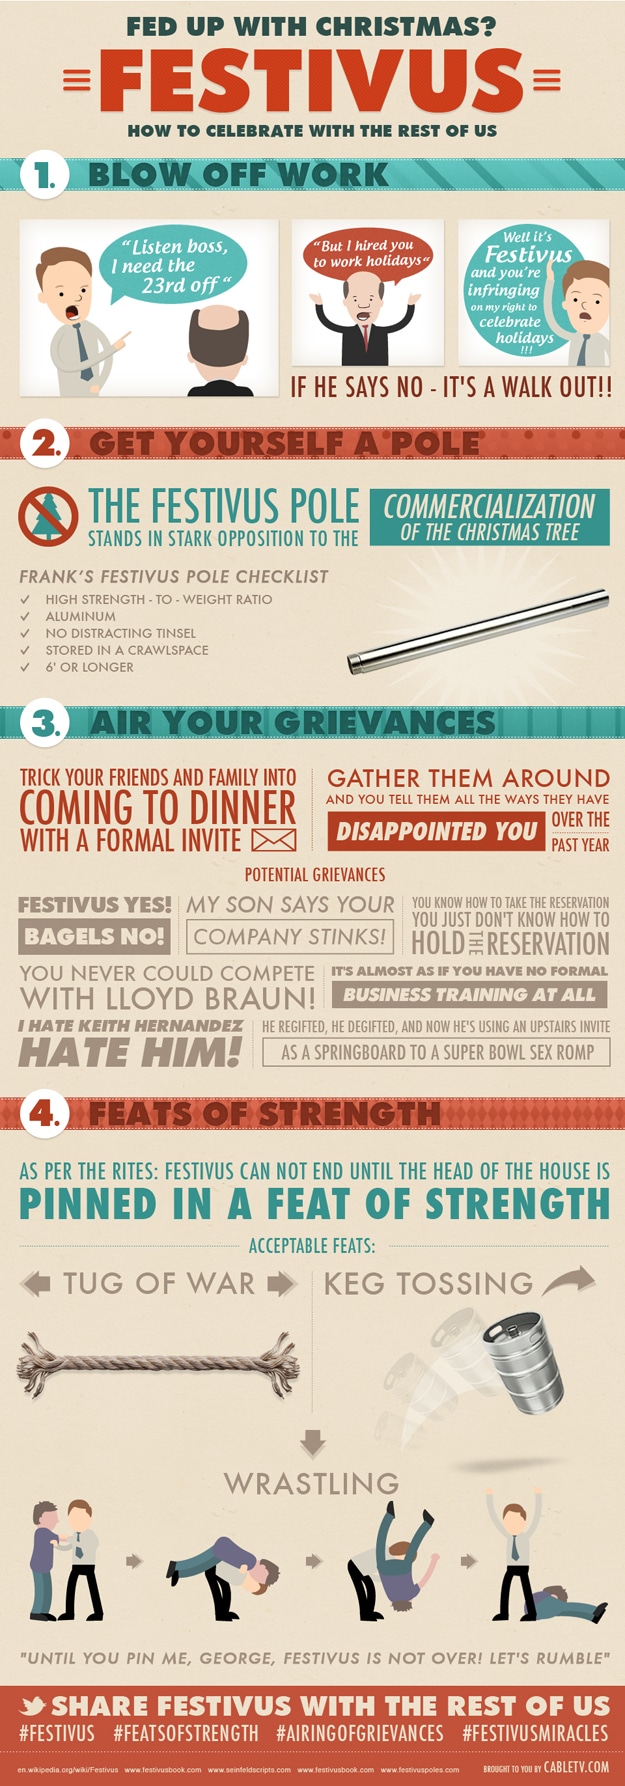 How To: Celebrate Festivus With The Rest Of Us [Infographic]